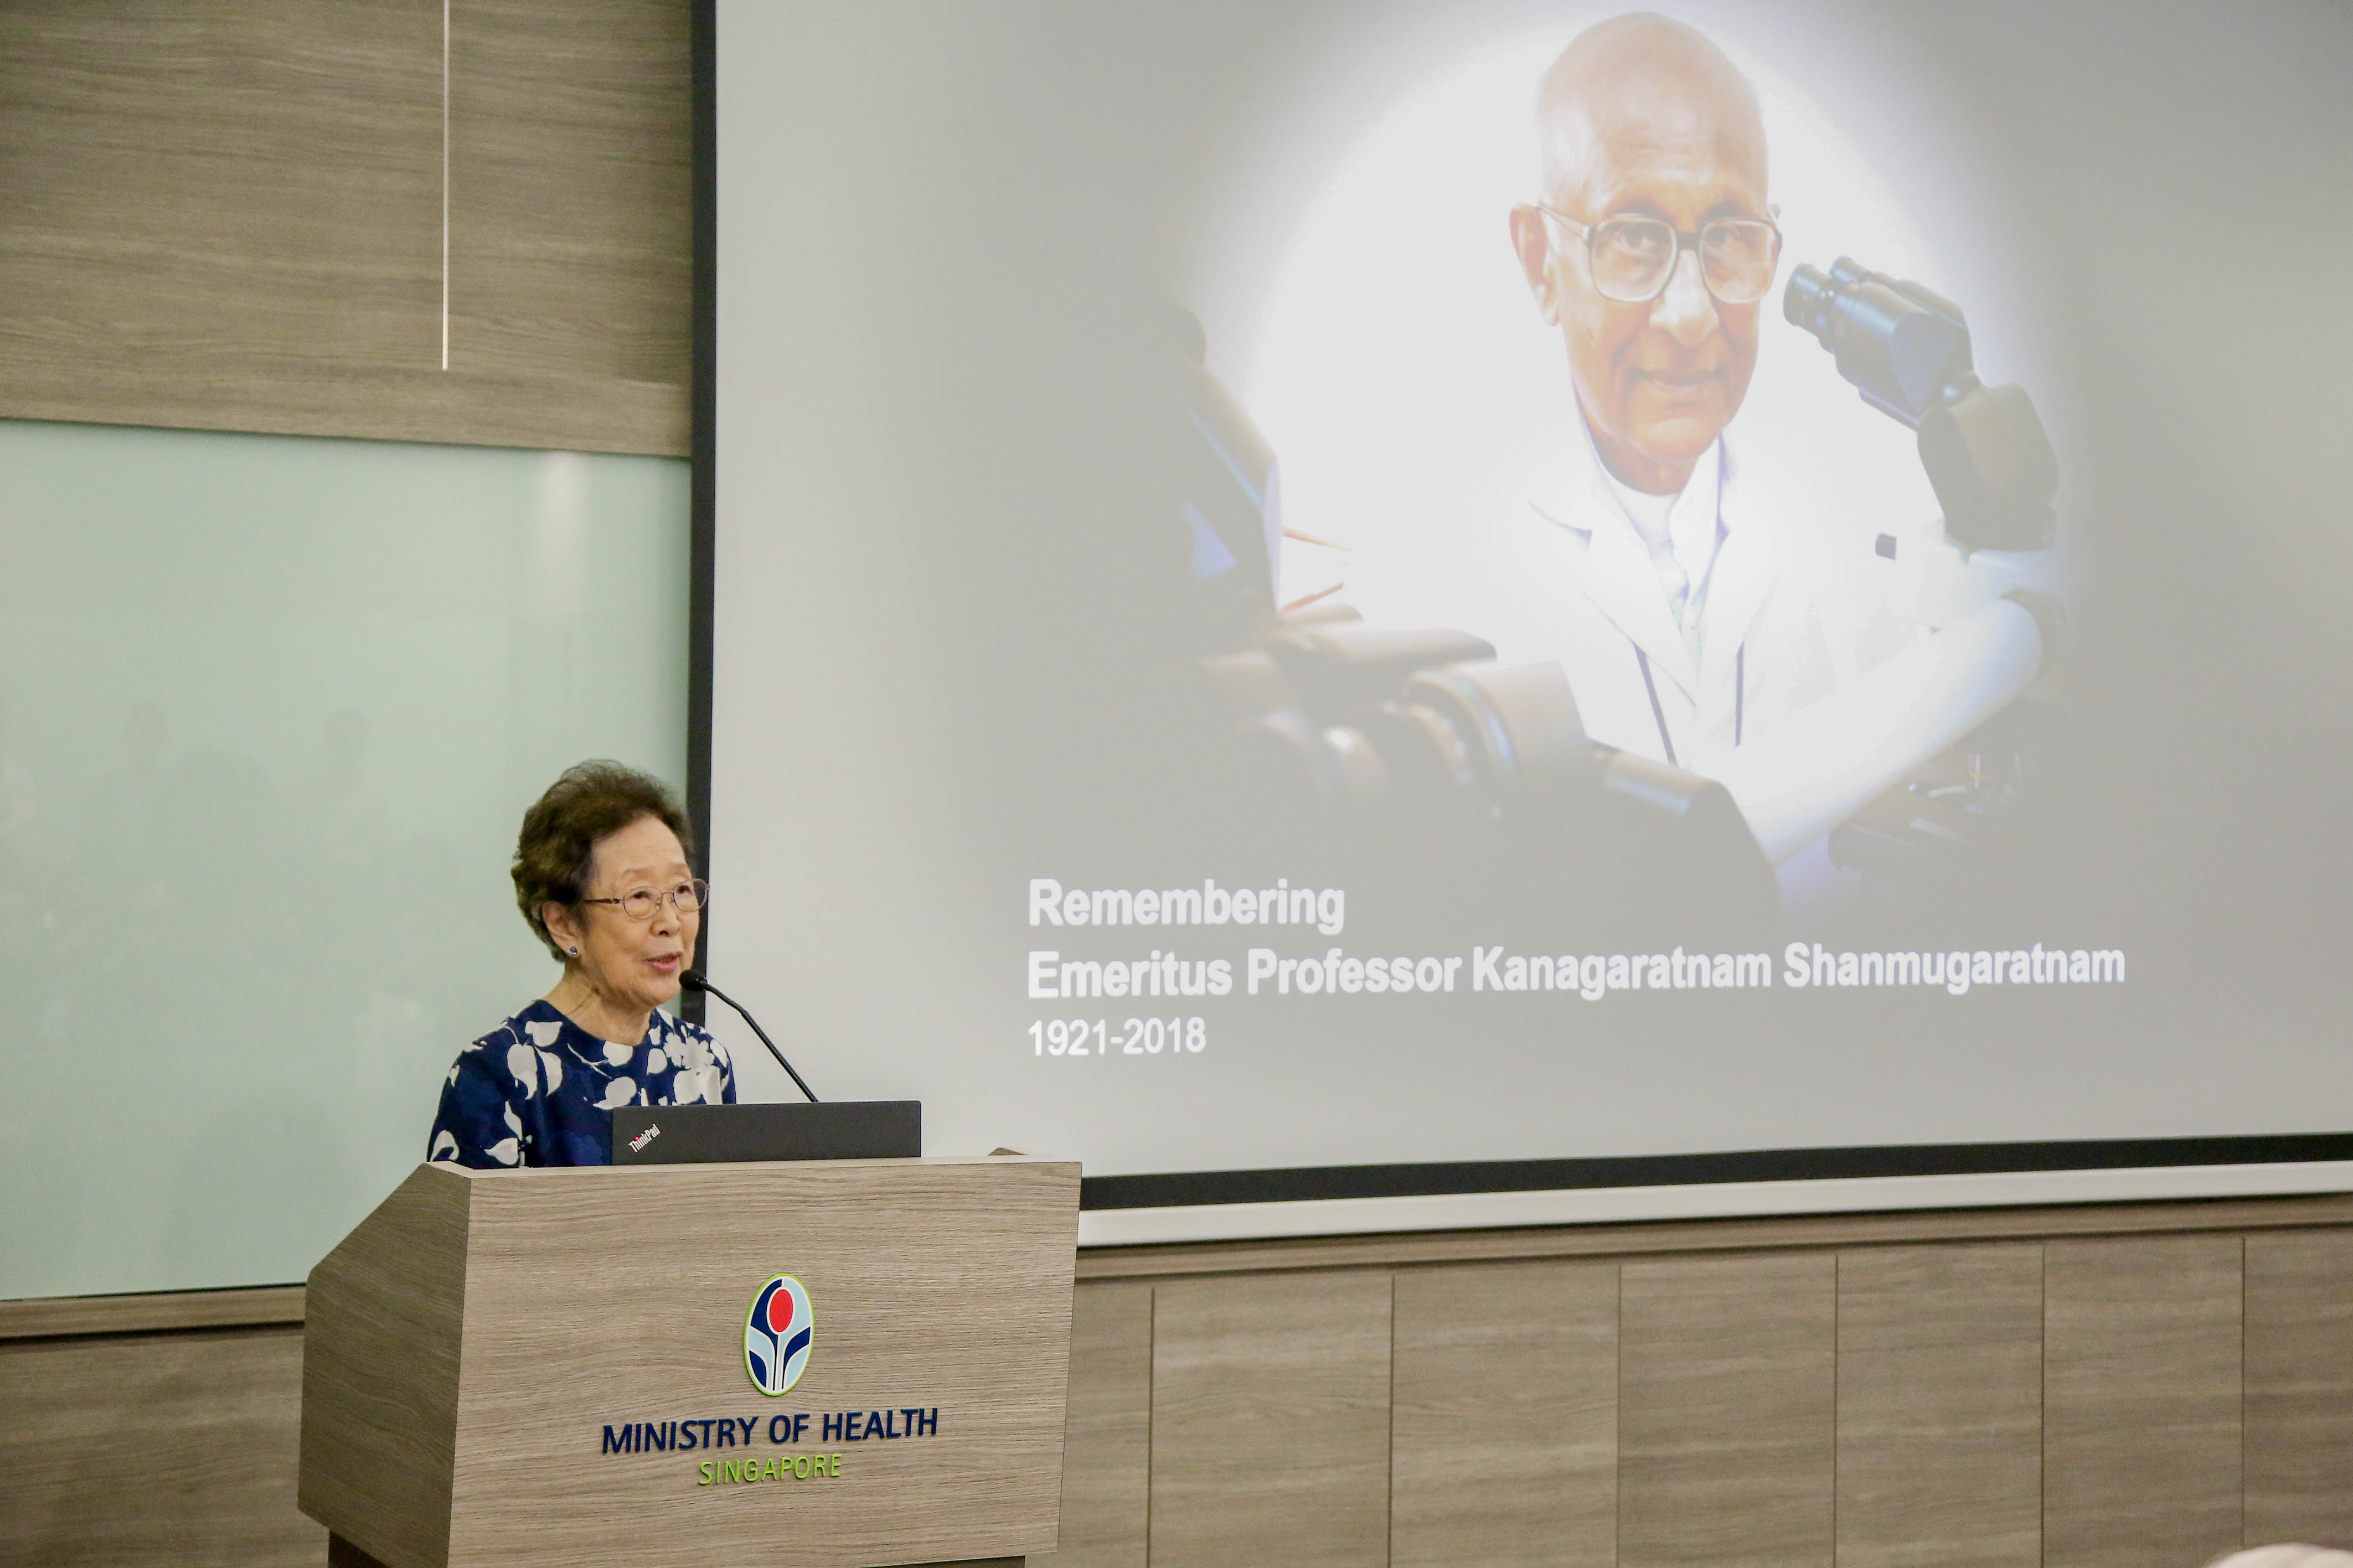 A/Prof Ivy Sng, Visiting Consultant, Singapore General Hospital, giving a speech in remembrance of Prof Shanmugaratnam.